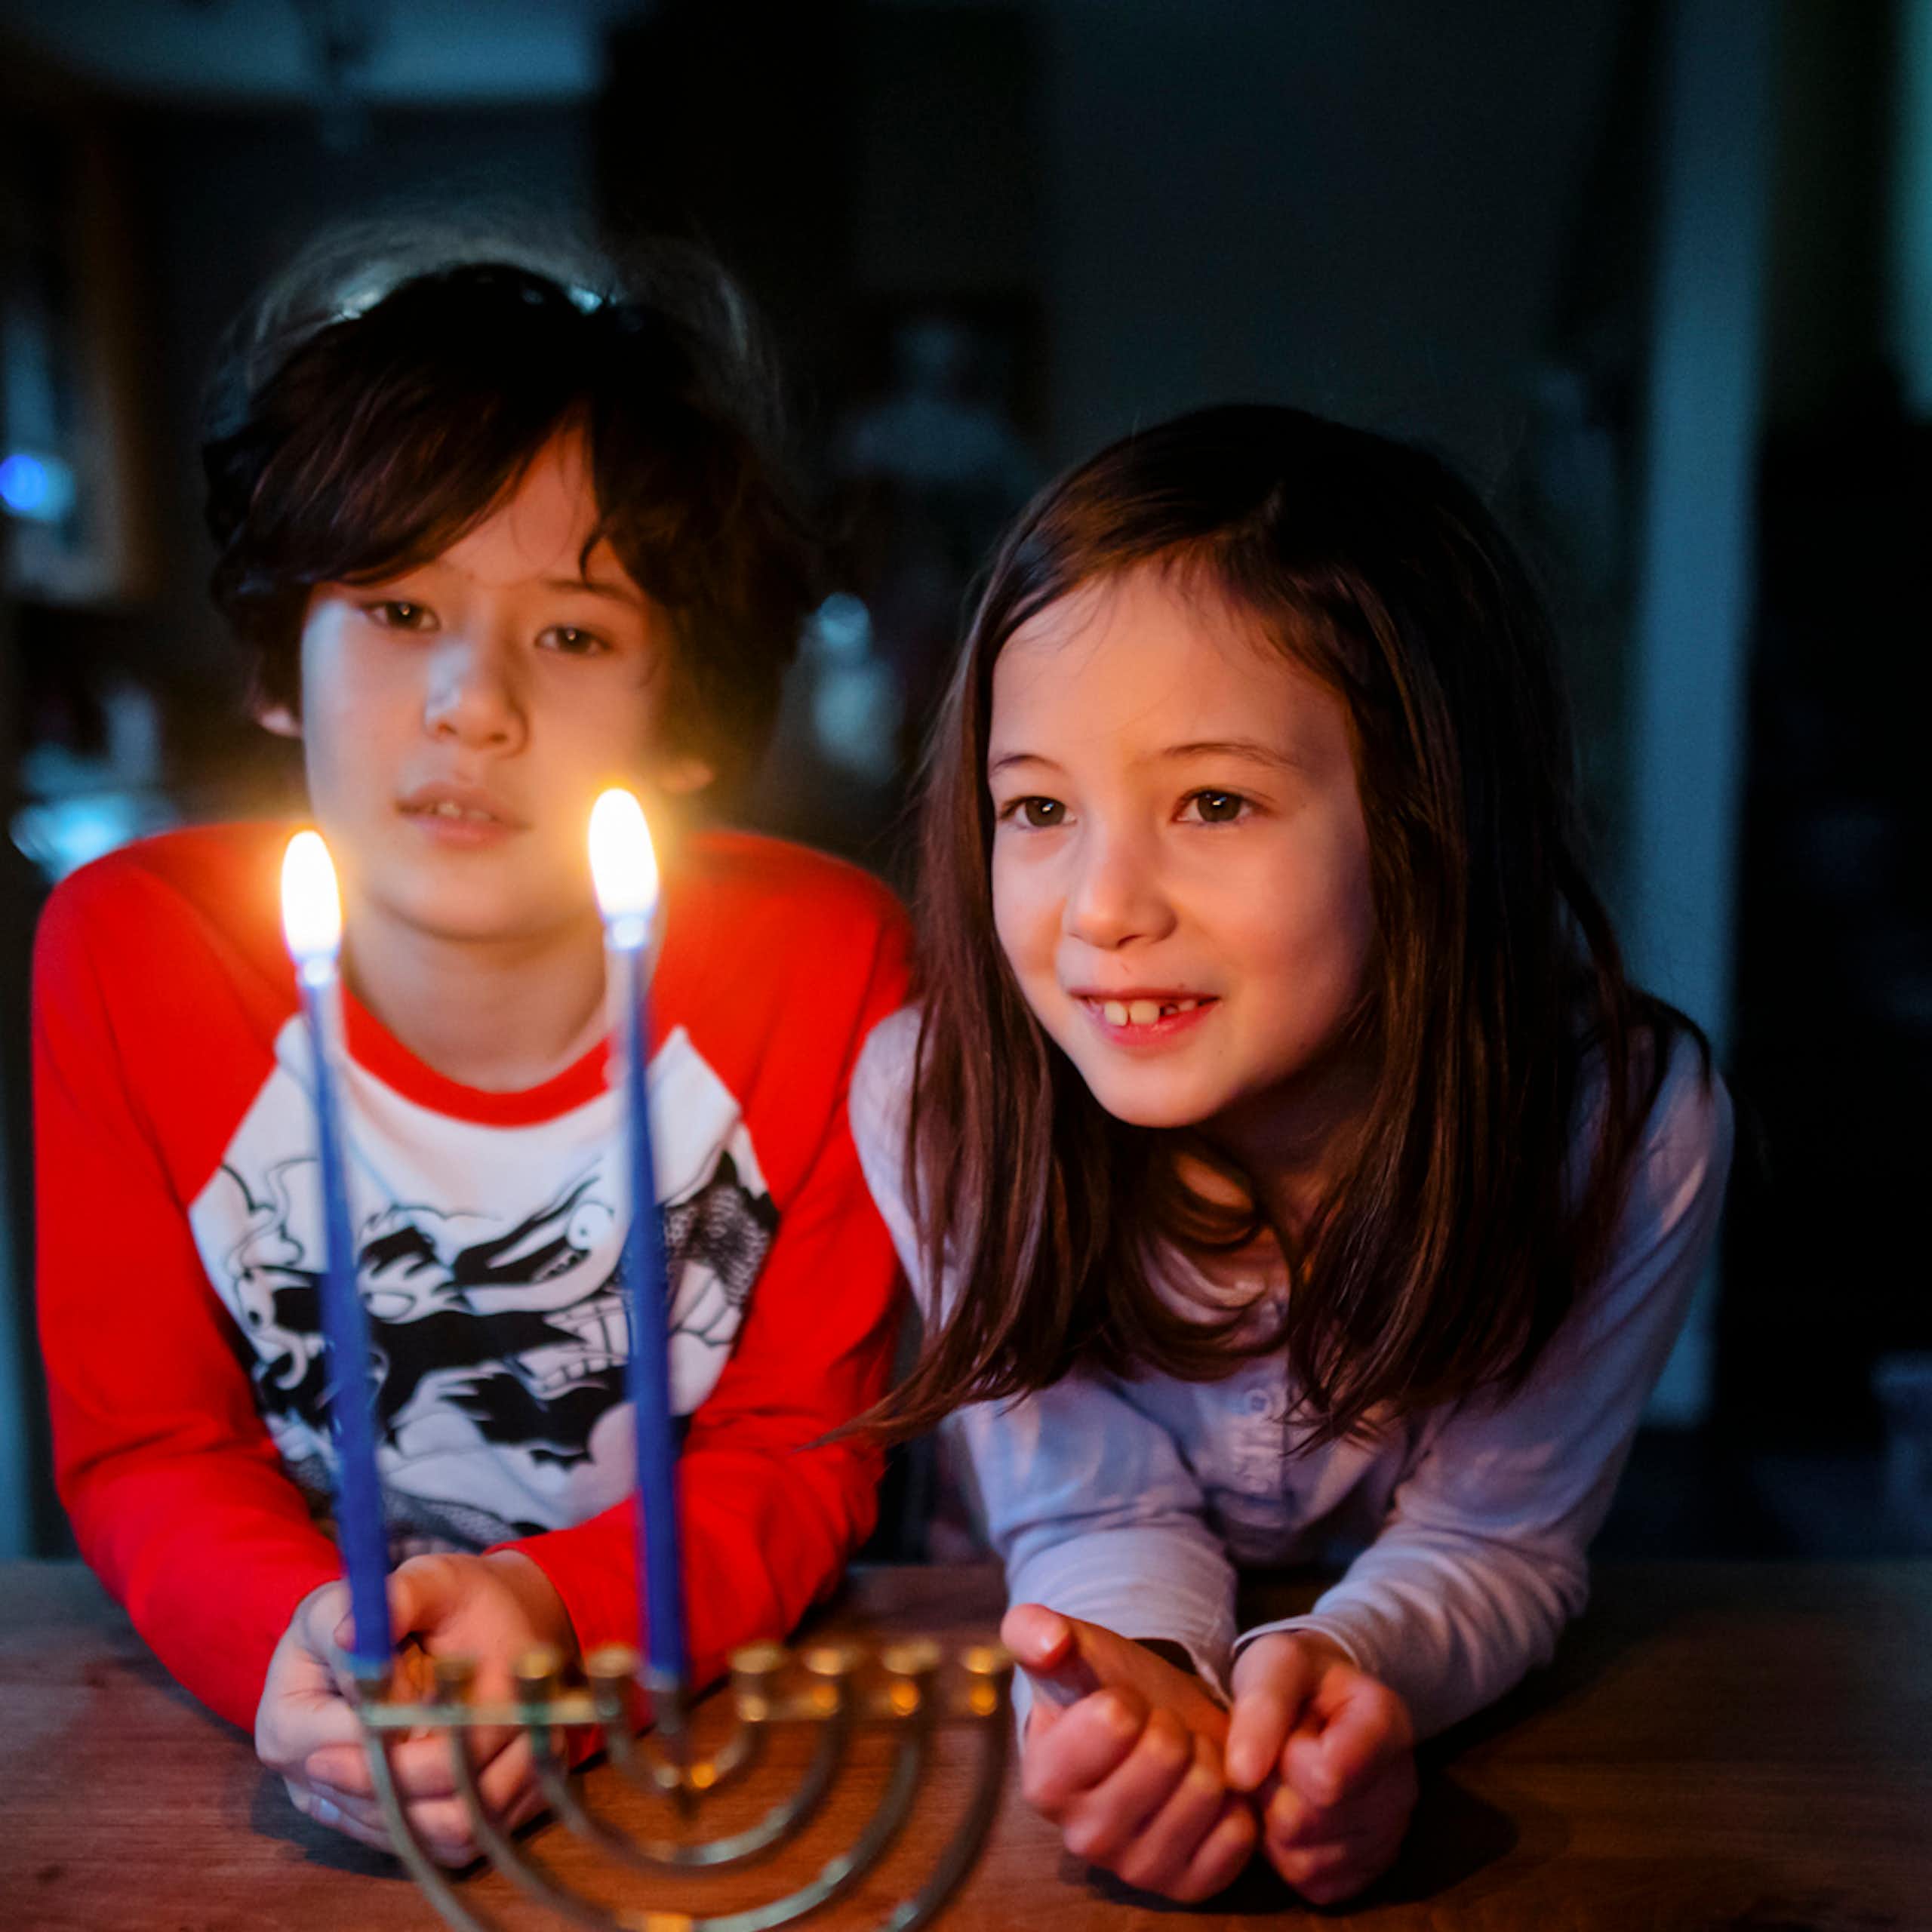 Two children in long-sleeve T-shirts look at two burning candles on a table.